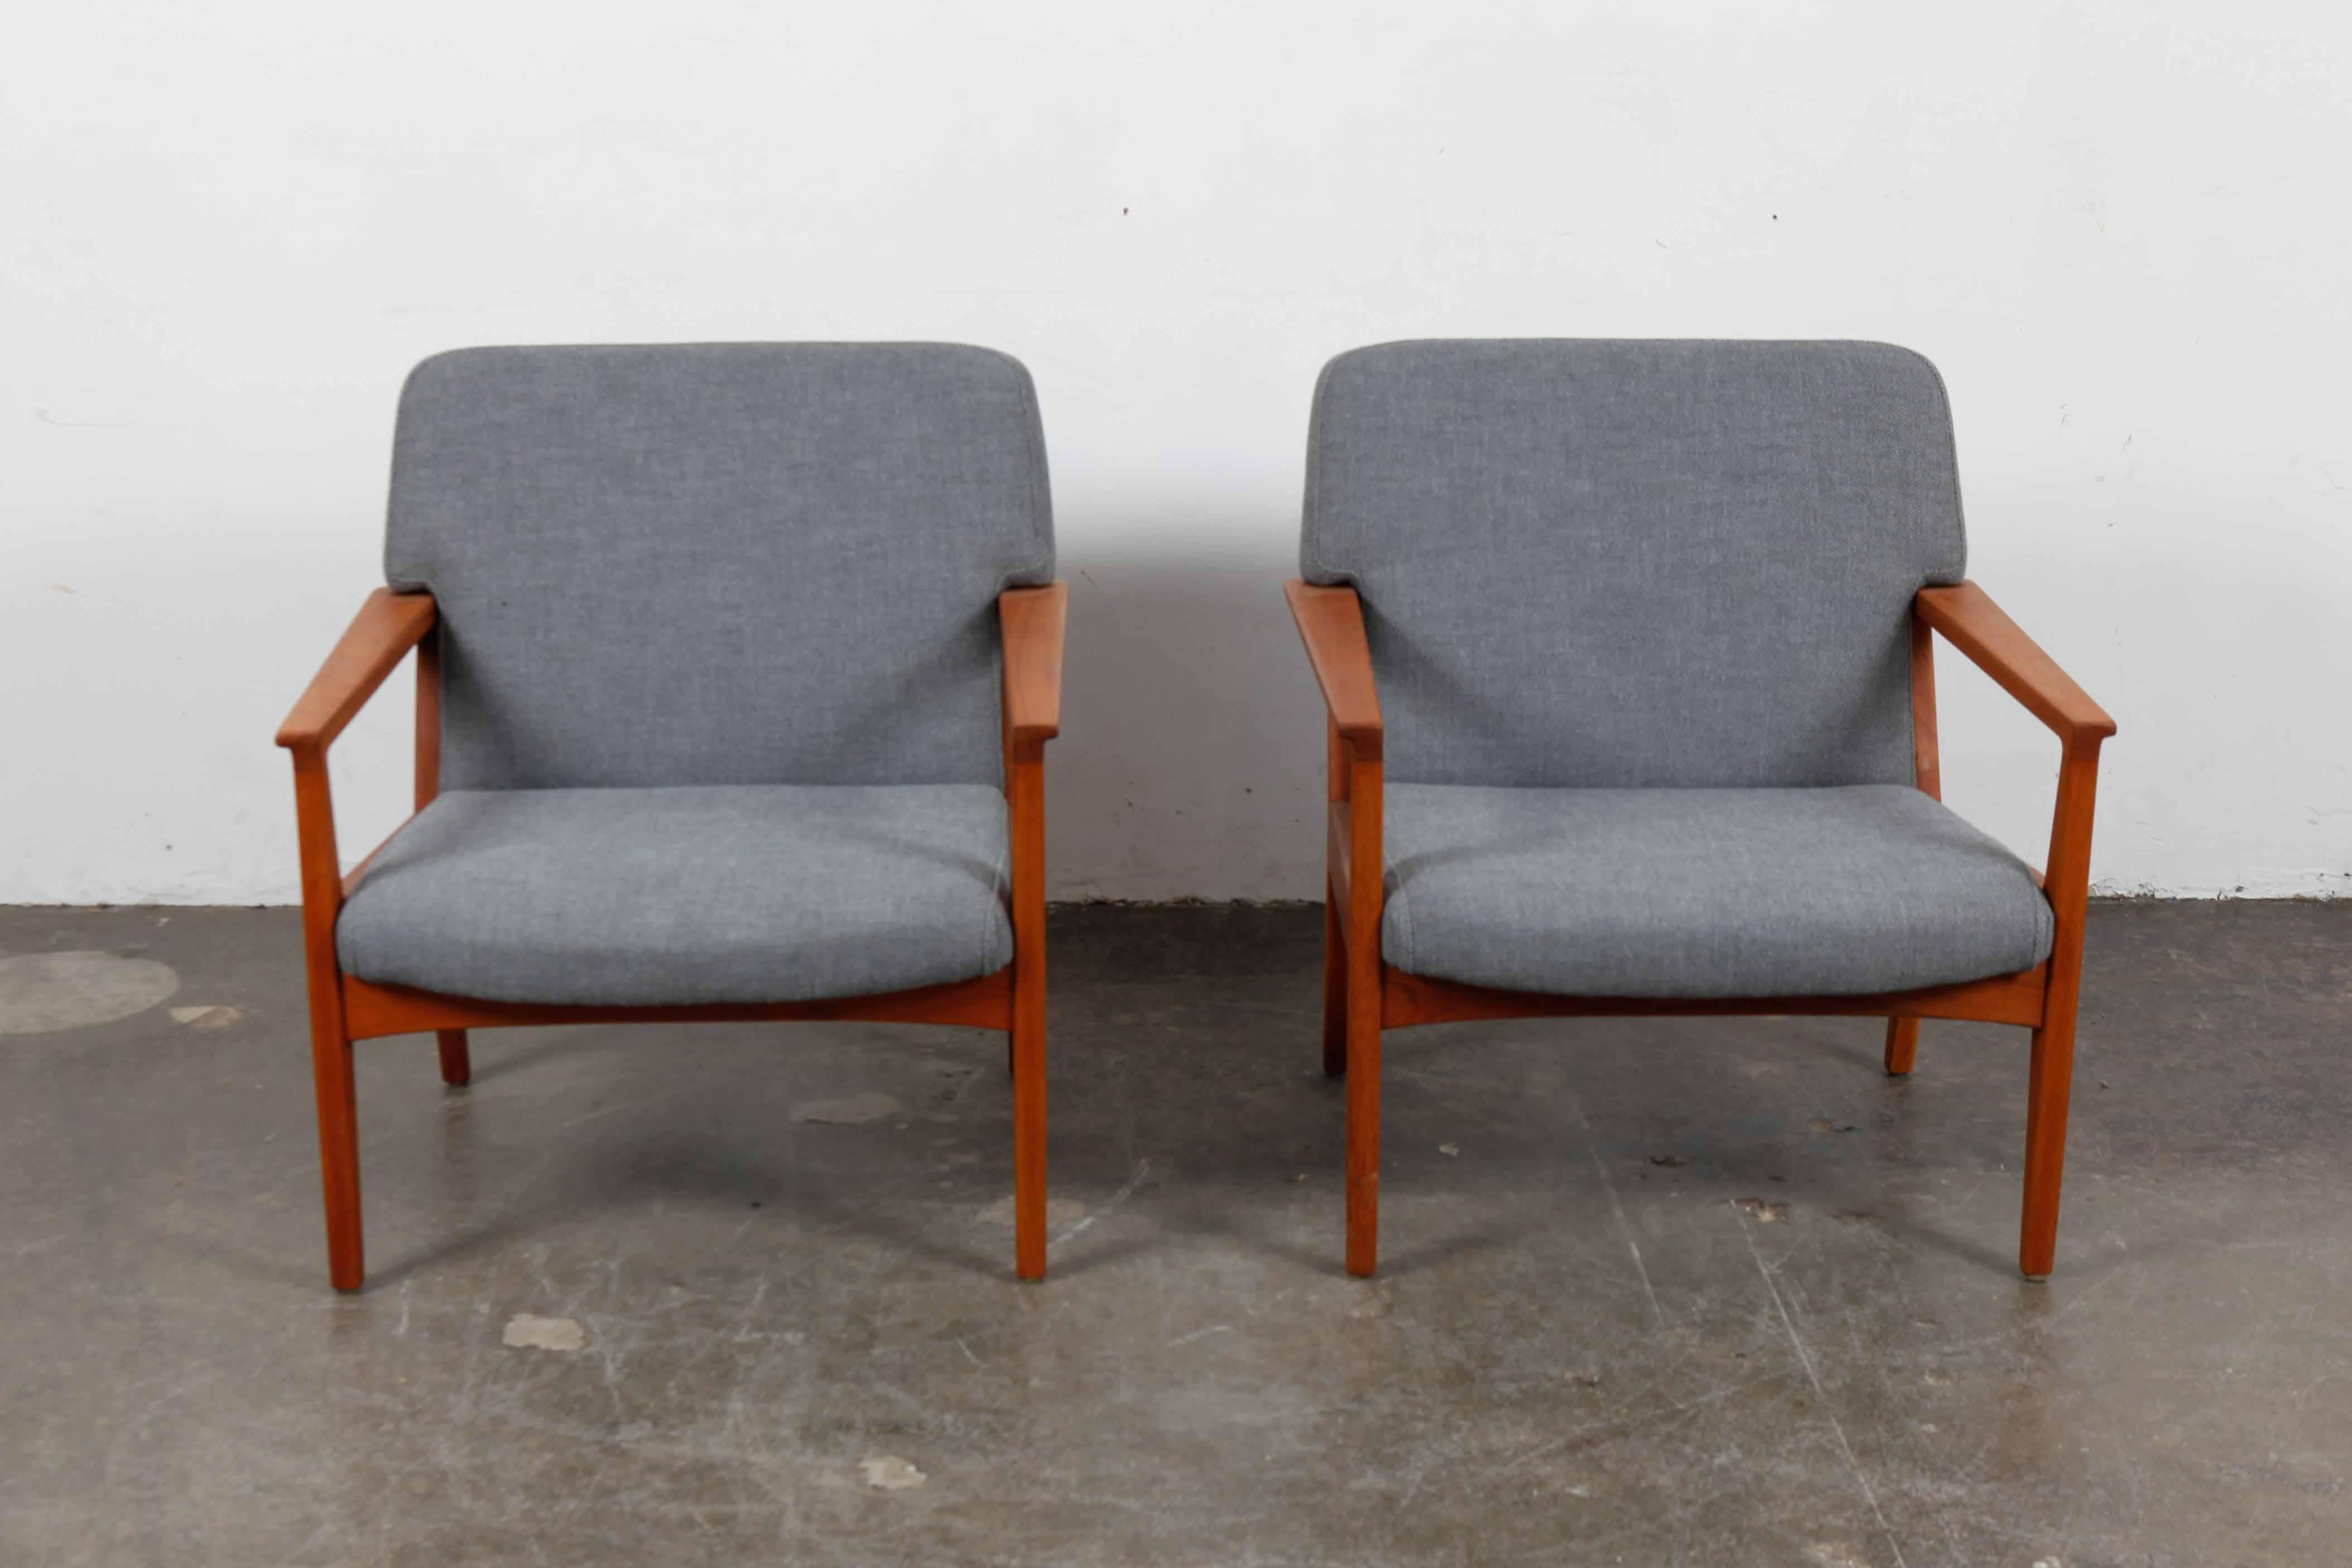 Pair of solid teak framed lounge chairs with fully upholstered seat and back, sleek angular lines, 1960s, Sweden. Newly upholstered in a gray heavy weight woven linen fabric and newly refinished in a matte teak oil finish.